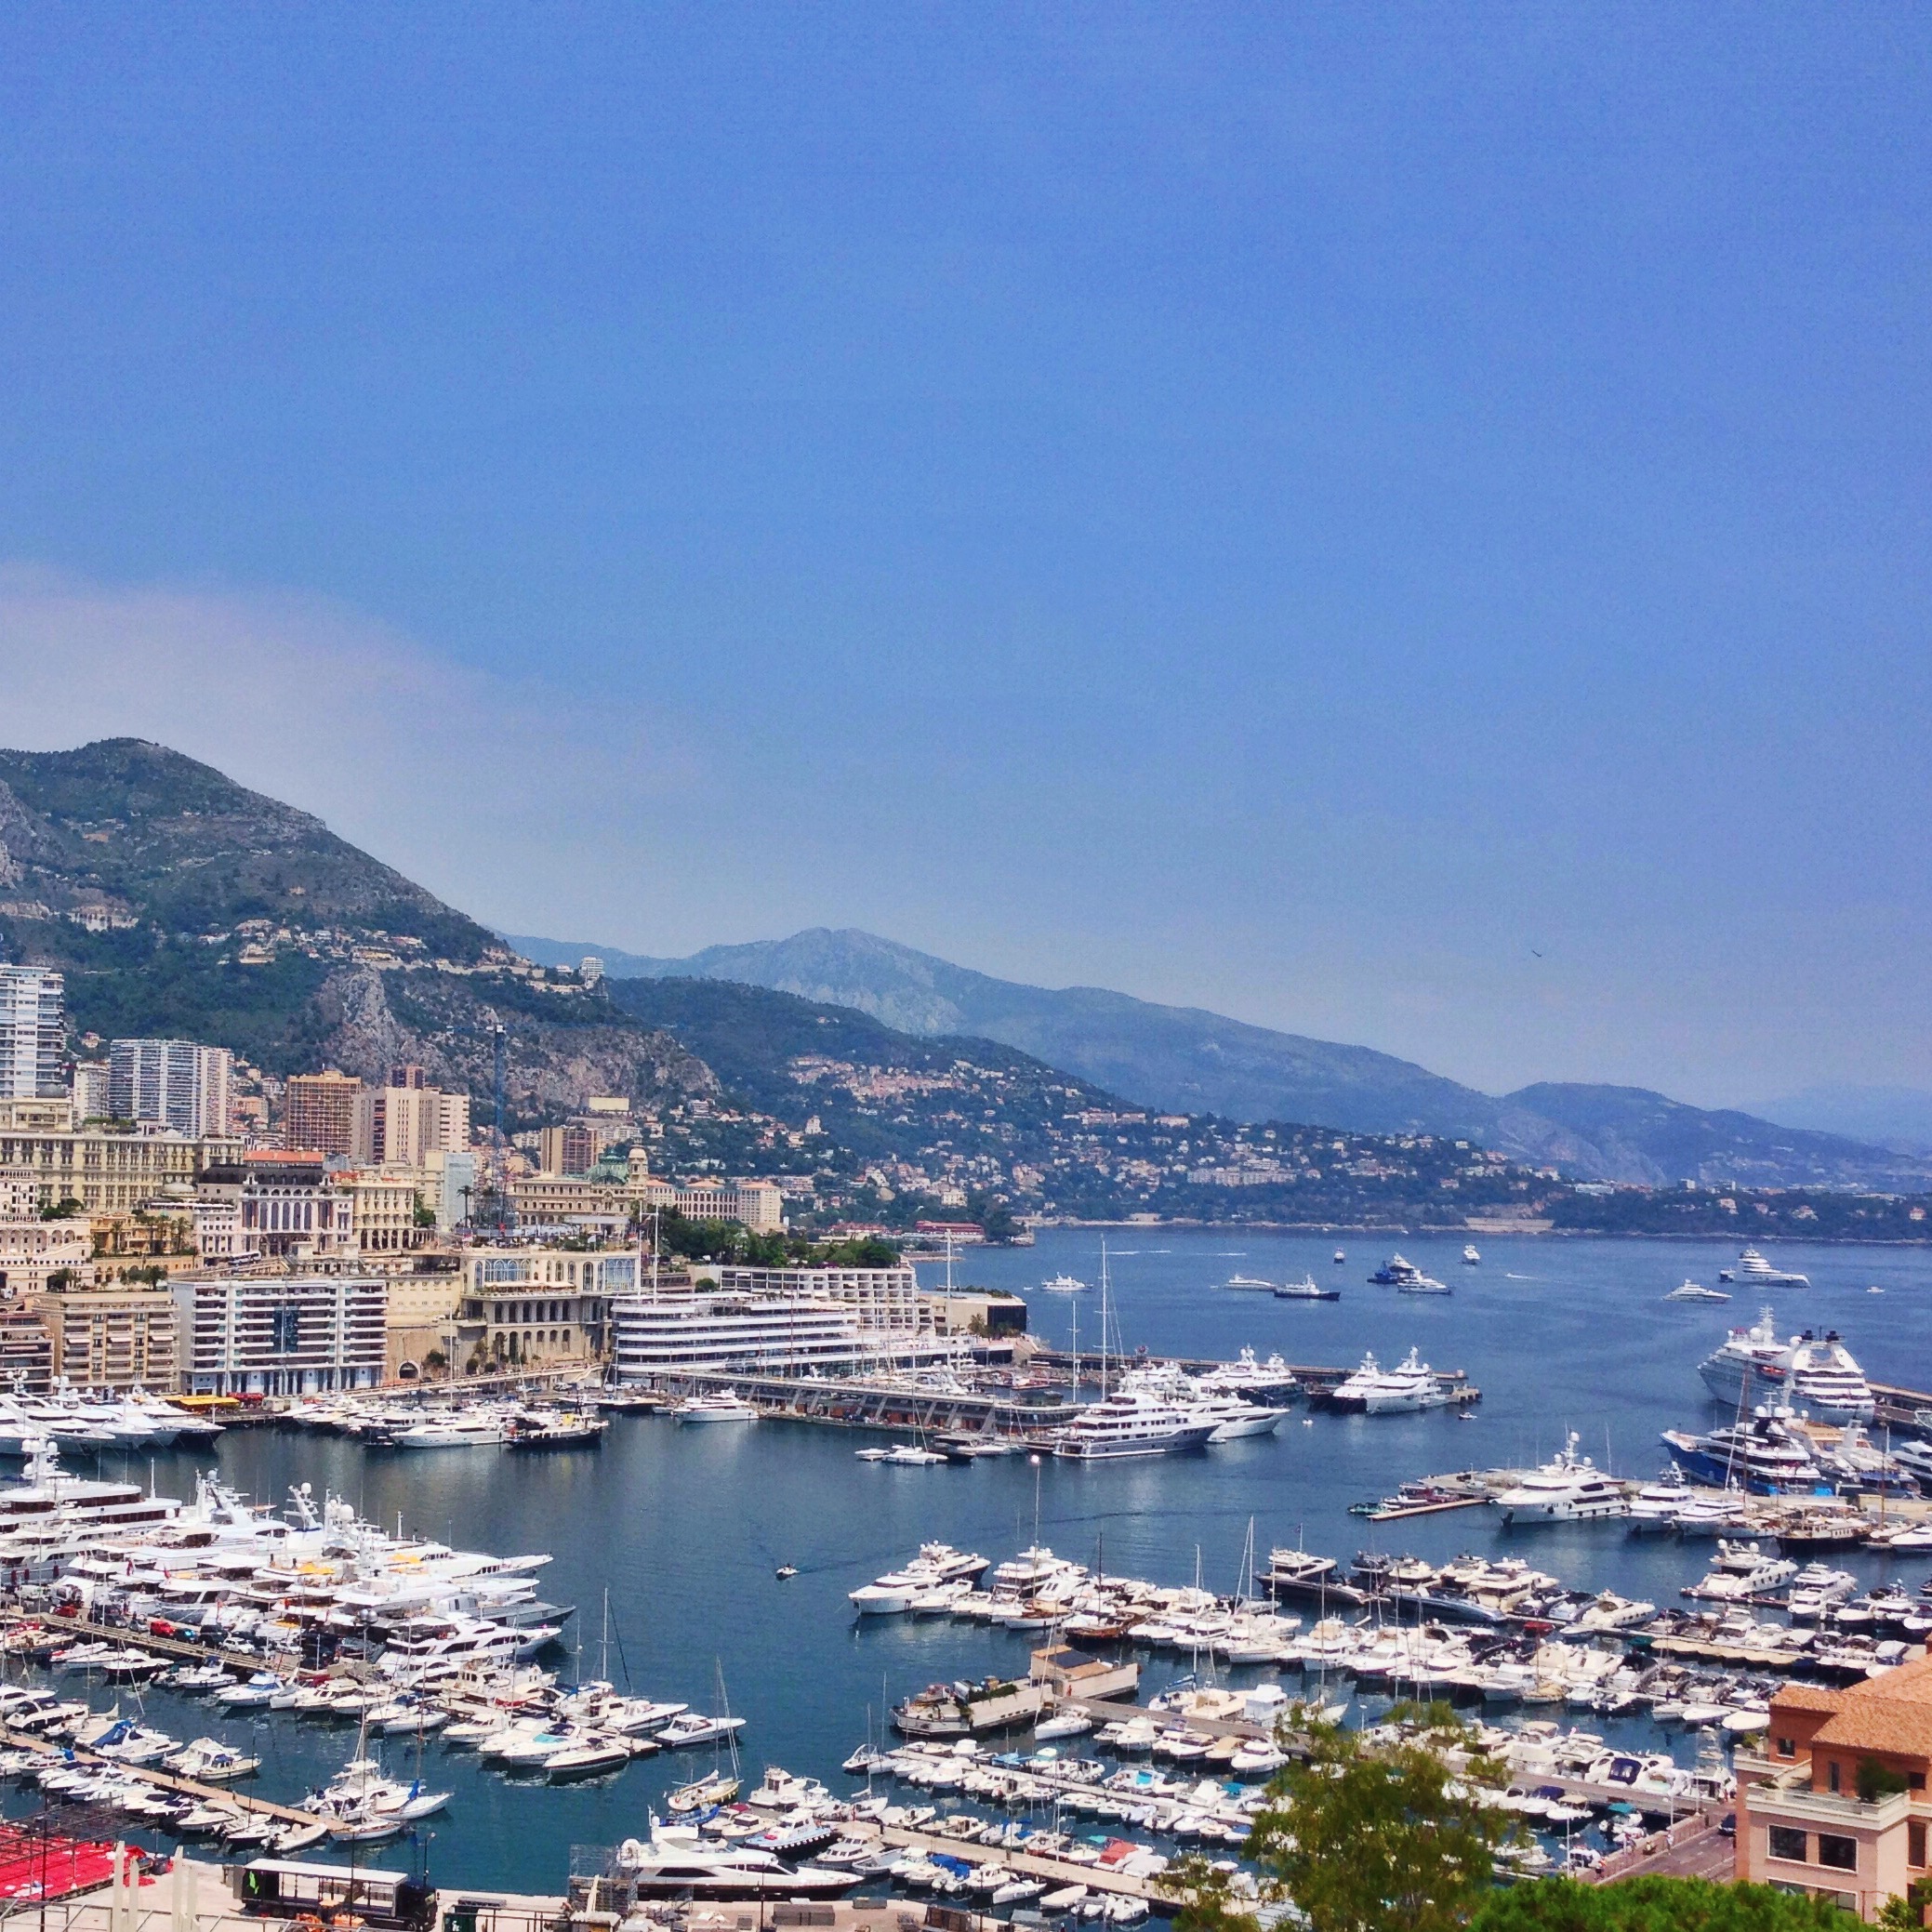 The Port with Luxury Yachts - Monaco - Côte d'Azur - South of France (French Riviera)